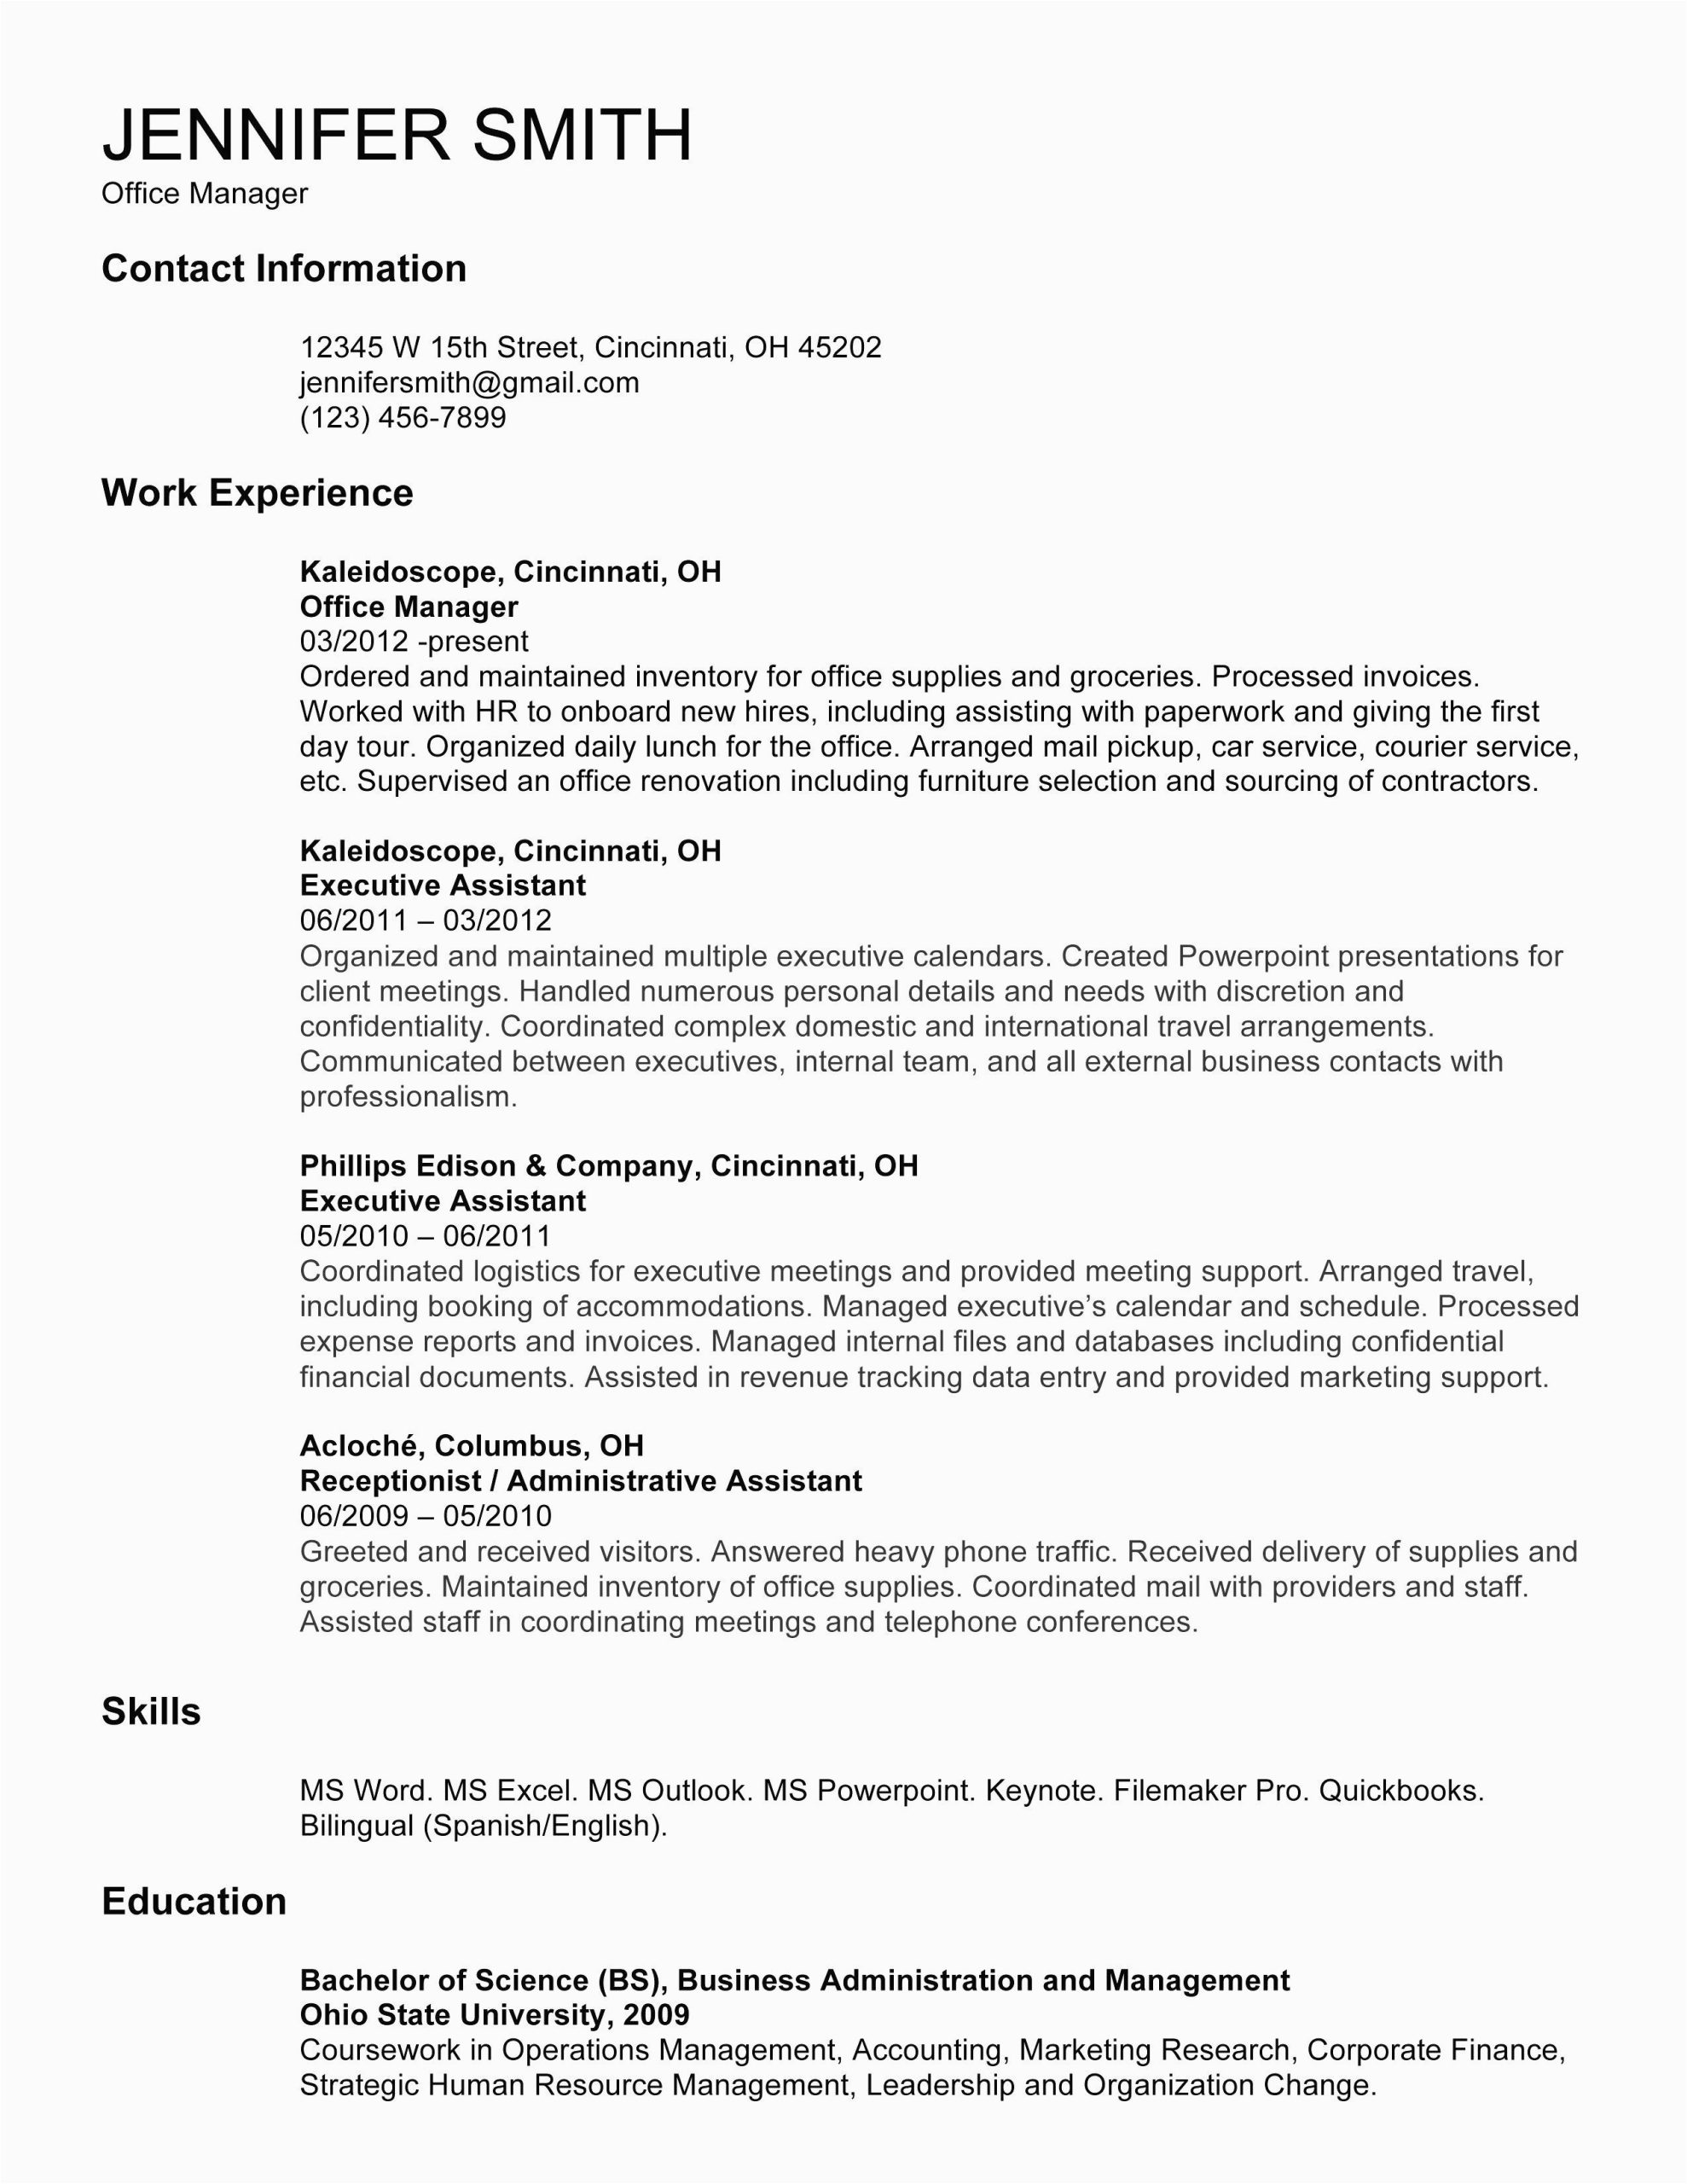 Resume Sample for Multiple Positions In the Same Company Resume Example Multiple Positions Same Pany